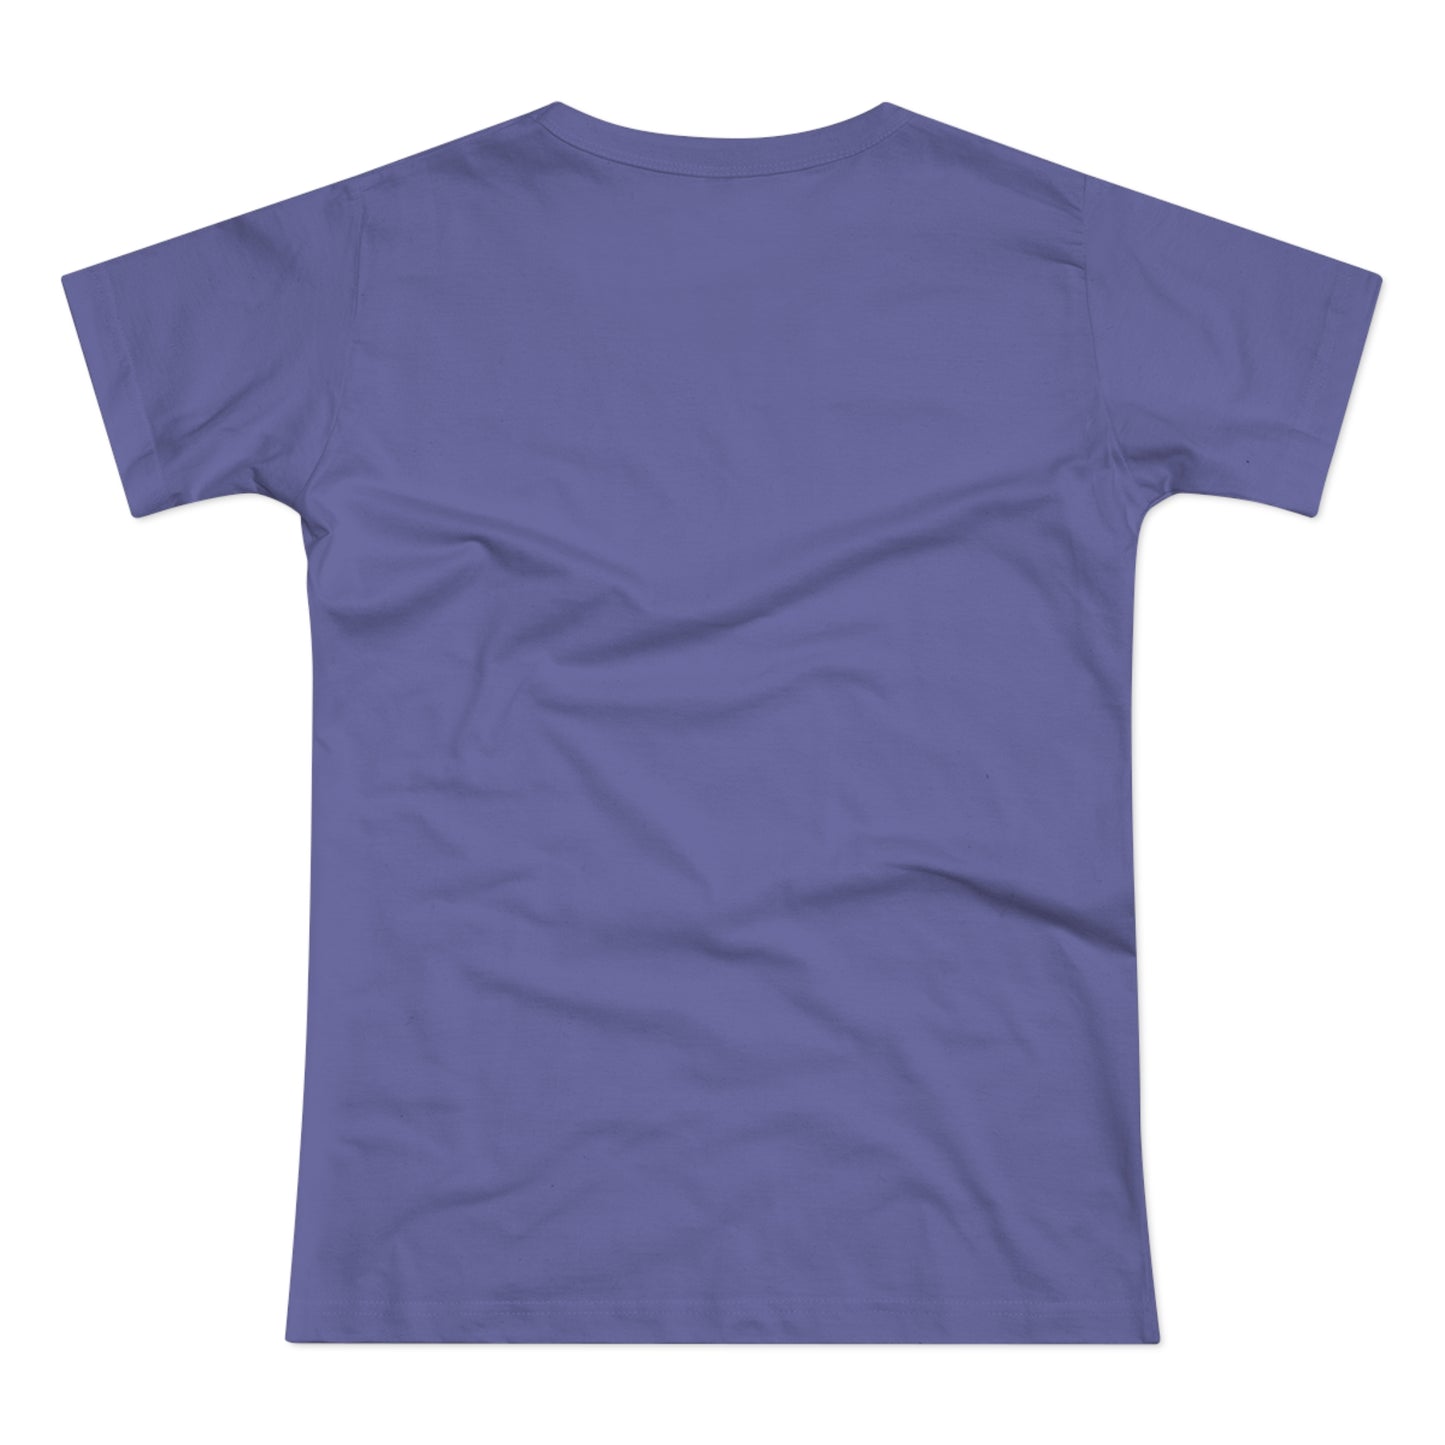 a purple t - shirt on a white background